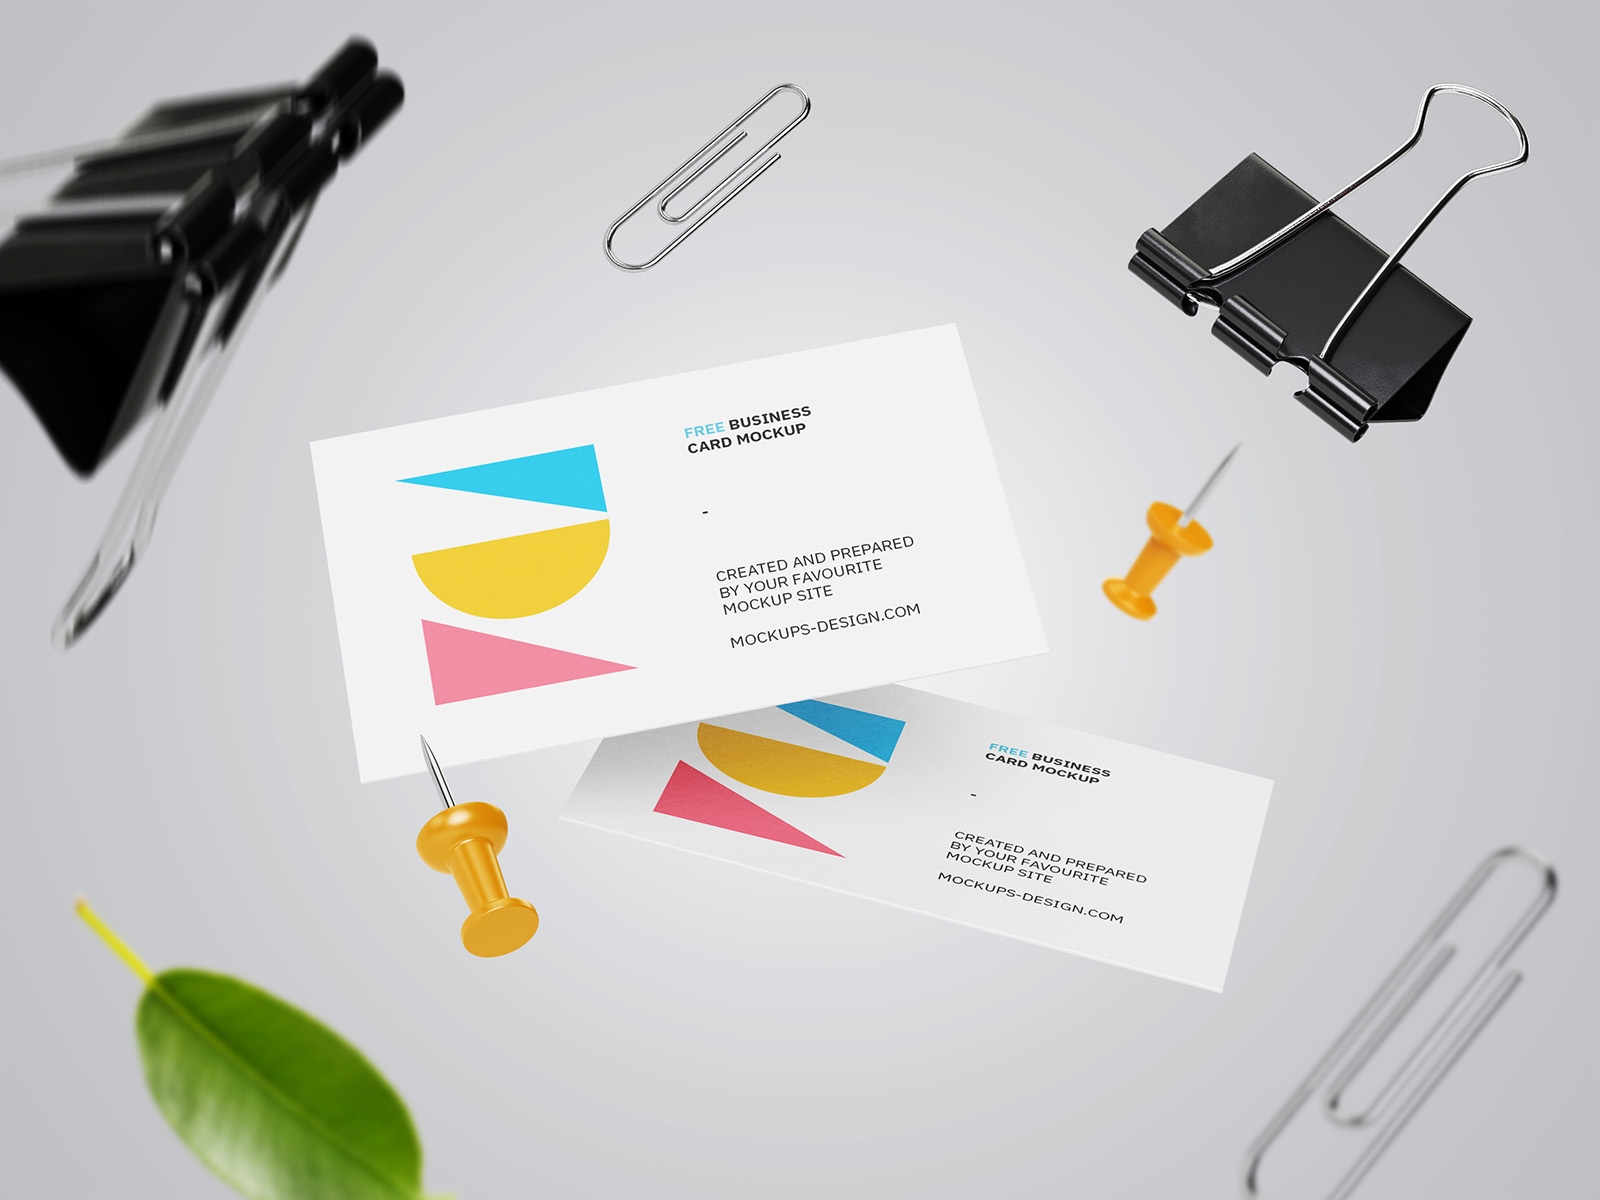 Two Falling Business Card Mockups with Floating Paper Clips FREE PSD